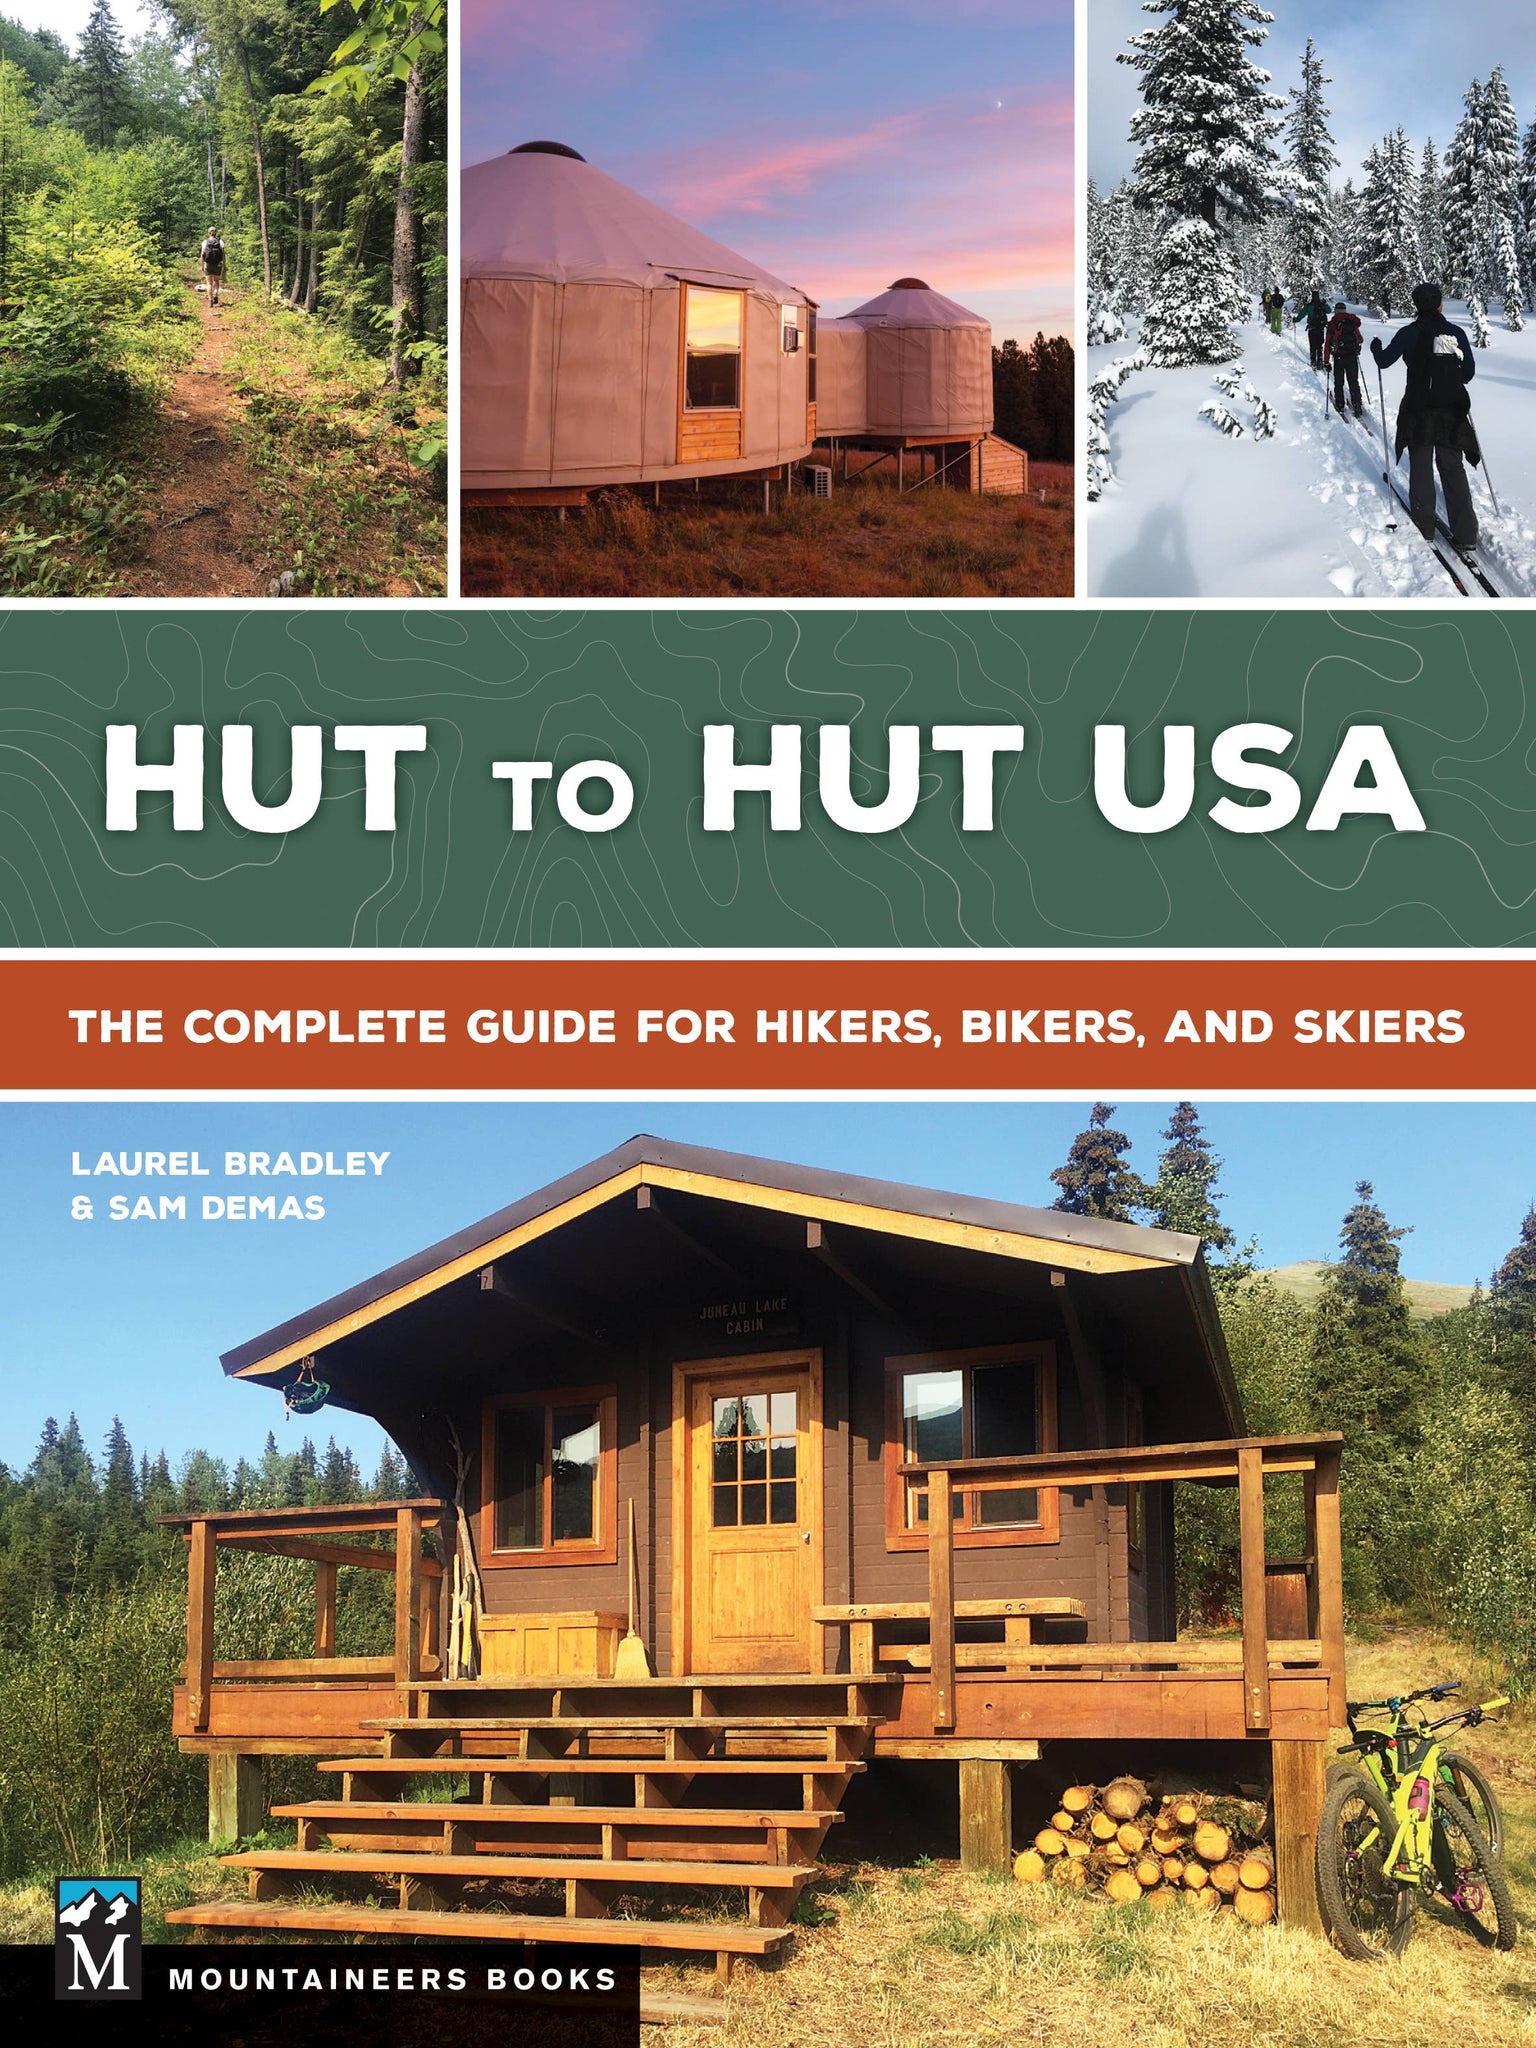 Mountaineers Books - Hut to Hut USA: The Complete Guide for Hikers